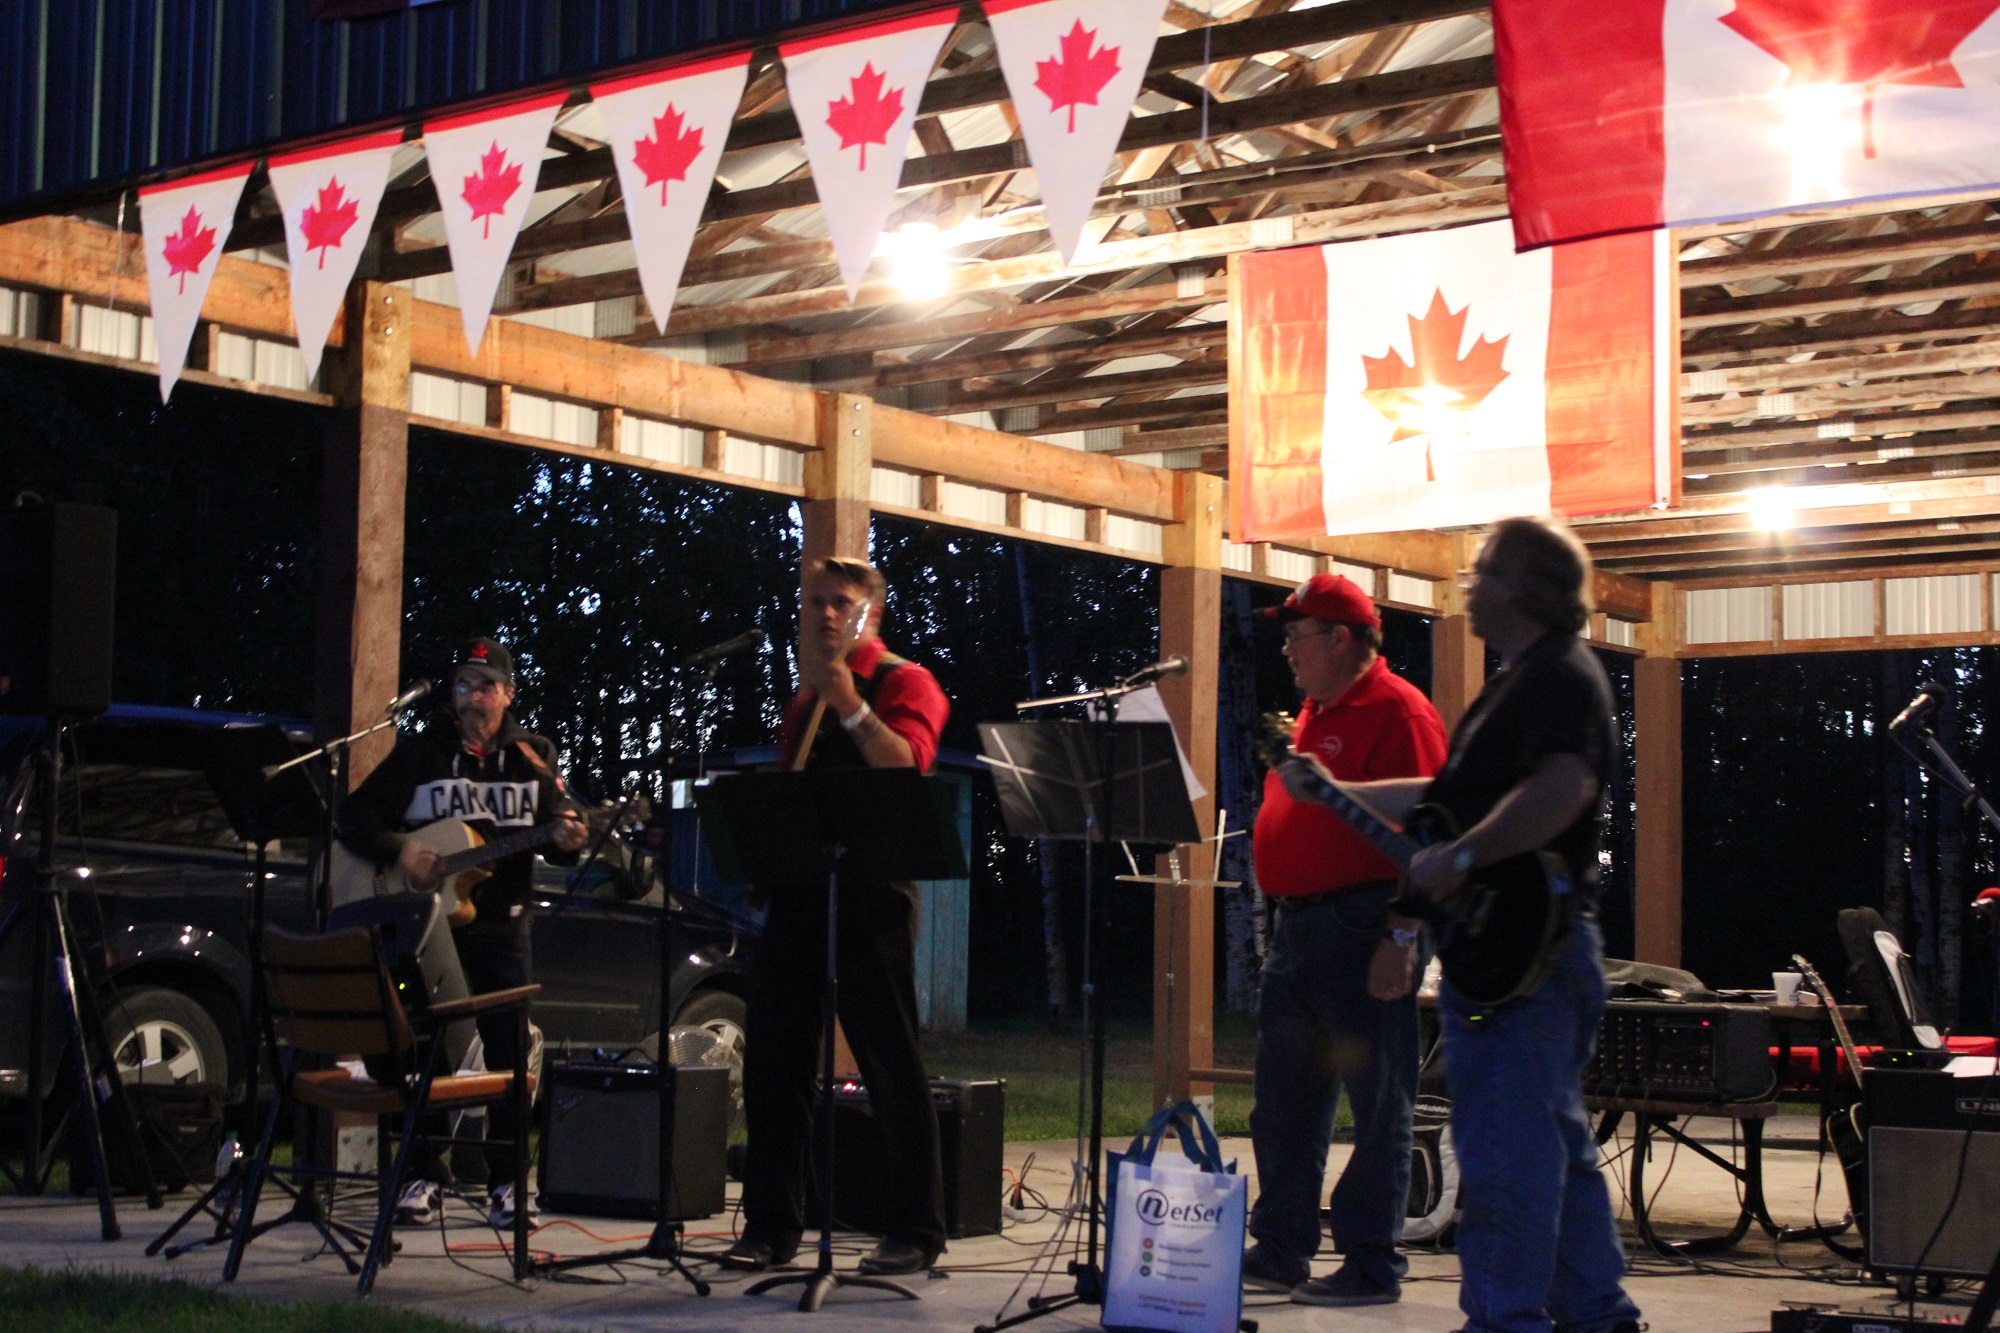 Canada Day celebration in South Junction Manitoba